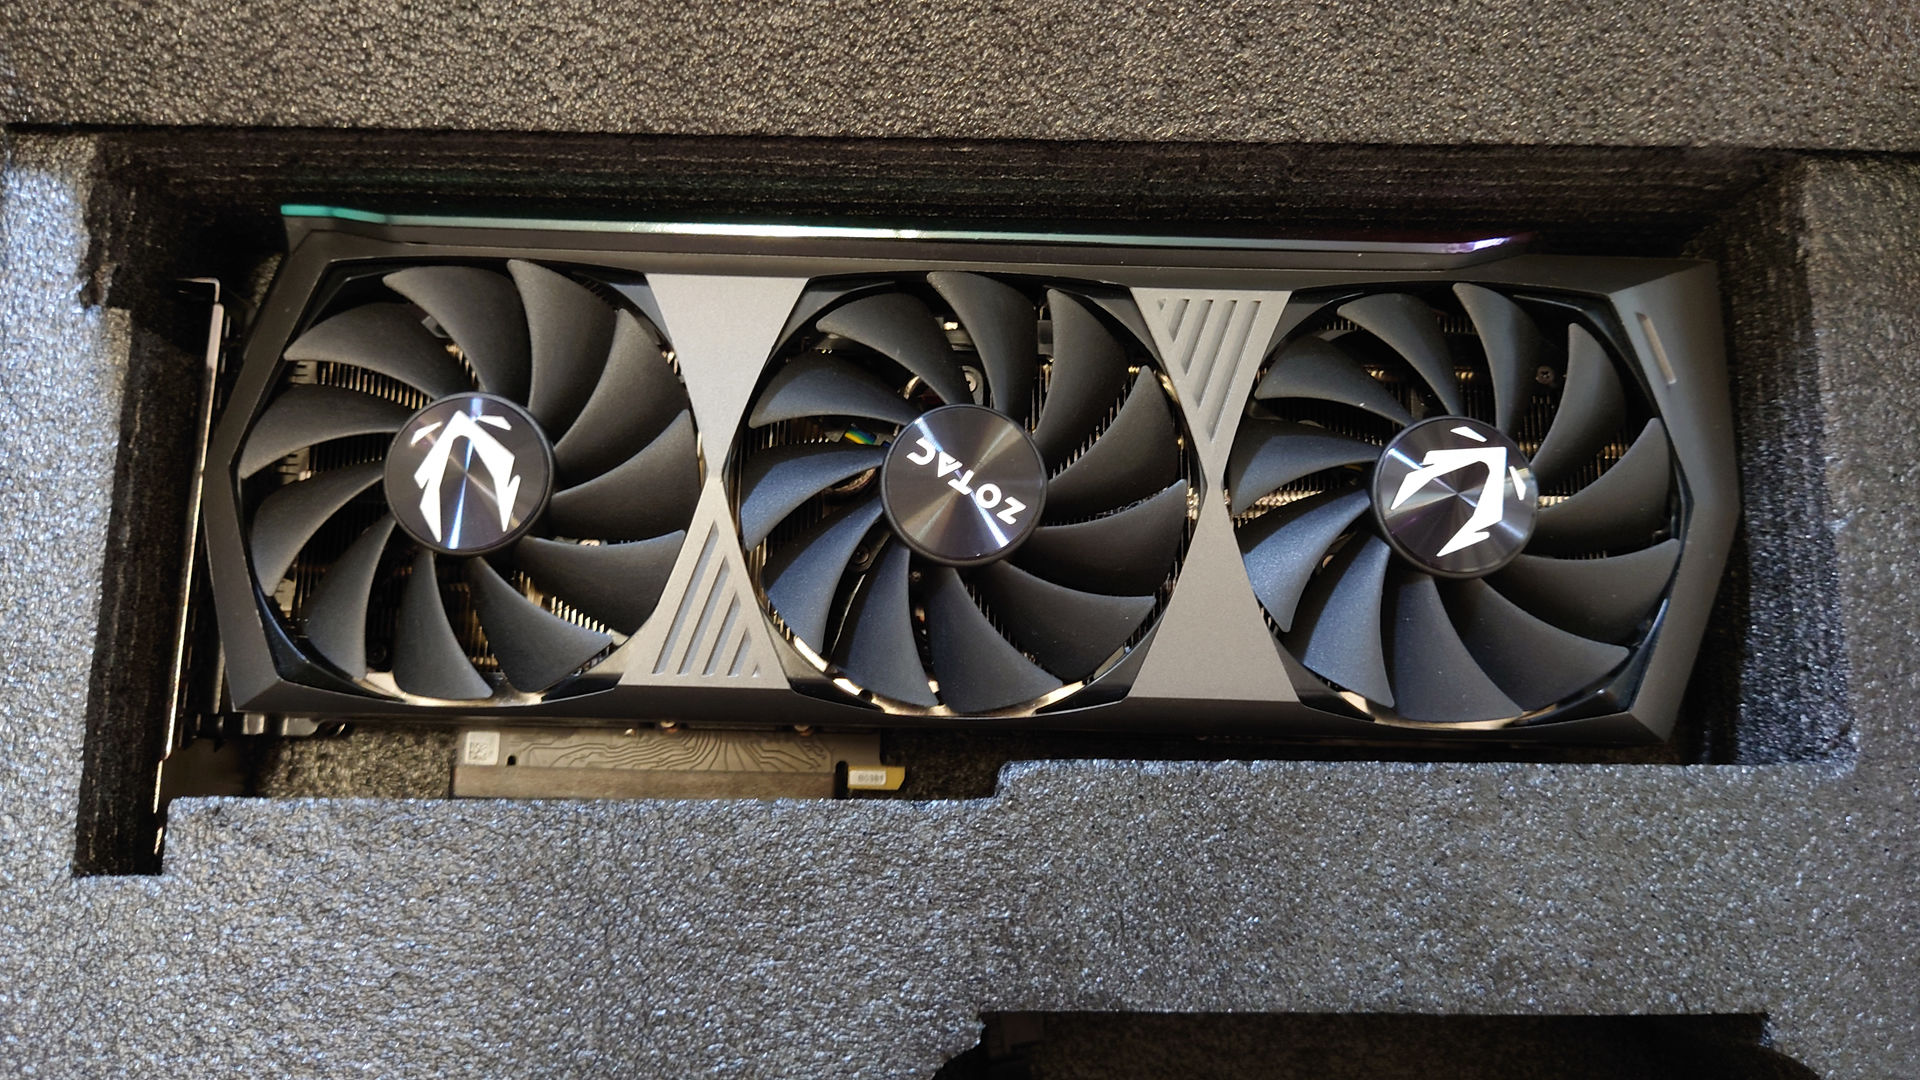 Zotac Gaming GeForce RTX 3080 AMP Holo review: 